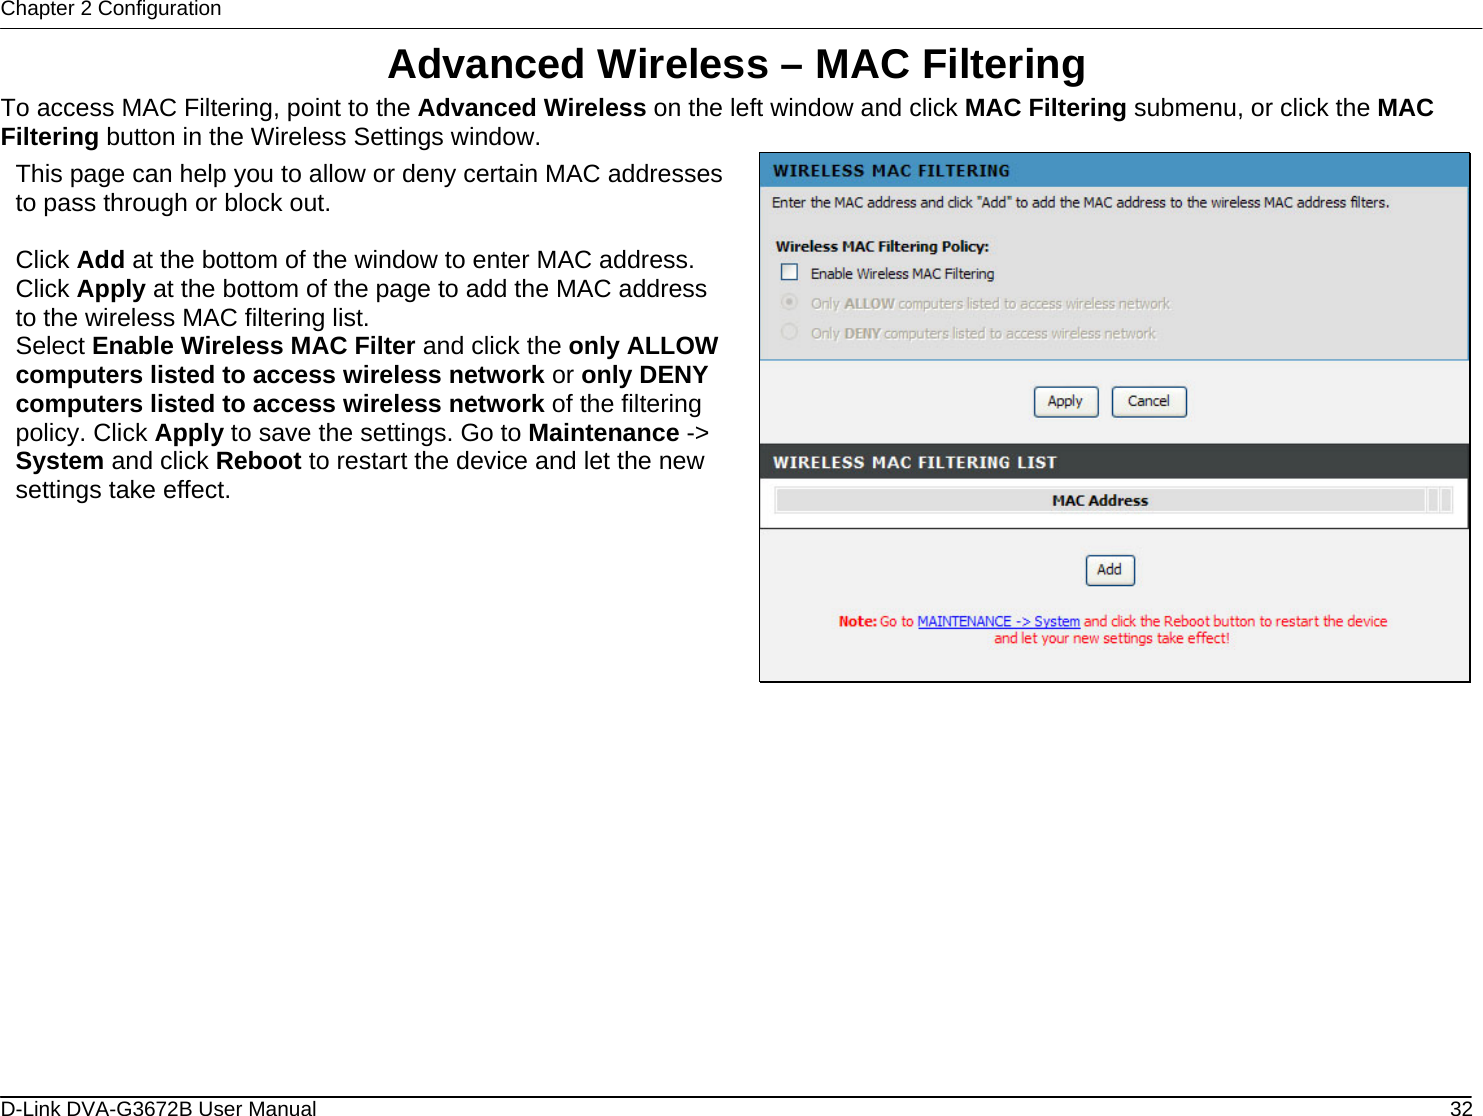 Chapter 2 Configuration Advanced Wireless – MAC Filtering To access MAC Filtering, point to the Advanced Wireless on the left window and click MAC Filtering submenu, or click the MAC Filtering button in the Wireless Settings window.  This page can help you to allow or deny certain MAC addresses to pass through or block out.  Click Add at the bottom of the window to enter MAC address. Click Apply at the bottom of the page to add the MAC address to the wireless MAC filtering list. Select Enable Wireless MAC Filter and click the only ALLOW computers listed to access wireless network or only DENY computers listed to access wireless network of the filtering policy. Click Apply to save the settings. Go to Maintenance -&gt; System and click Reboot to restart the device and let the new settings take effect.              D-Link DVA-G3672B User Manual  32